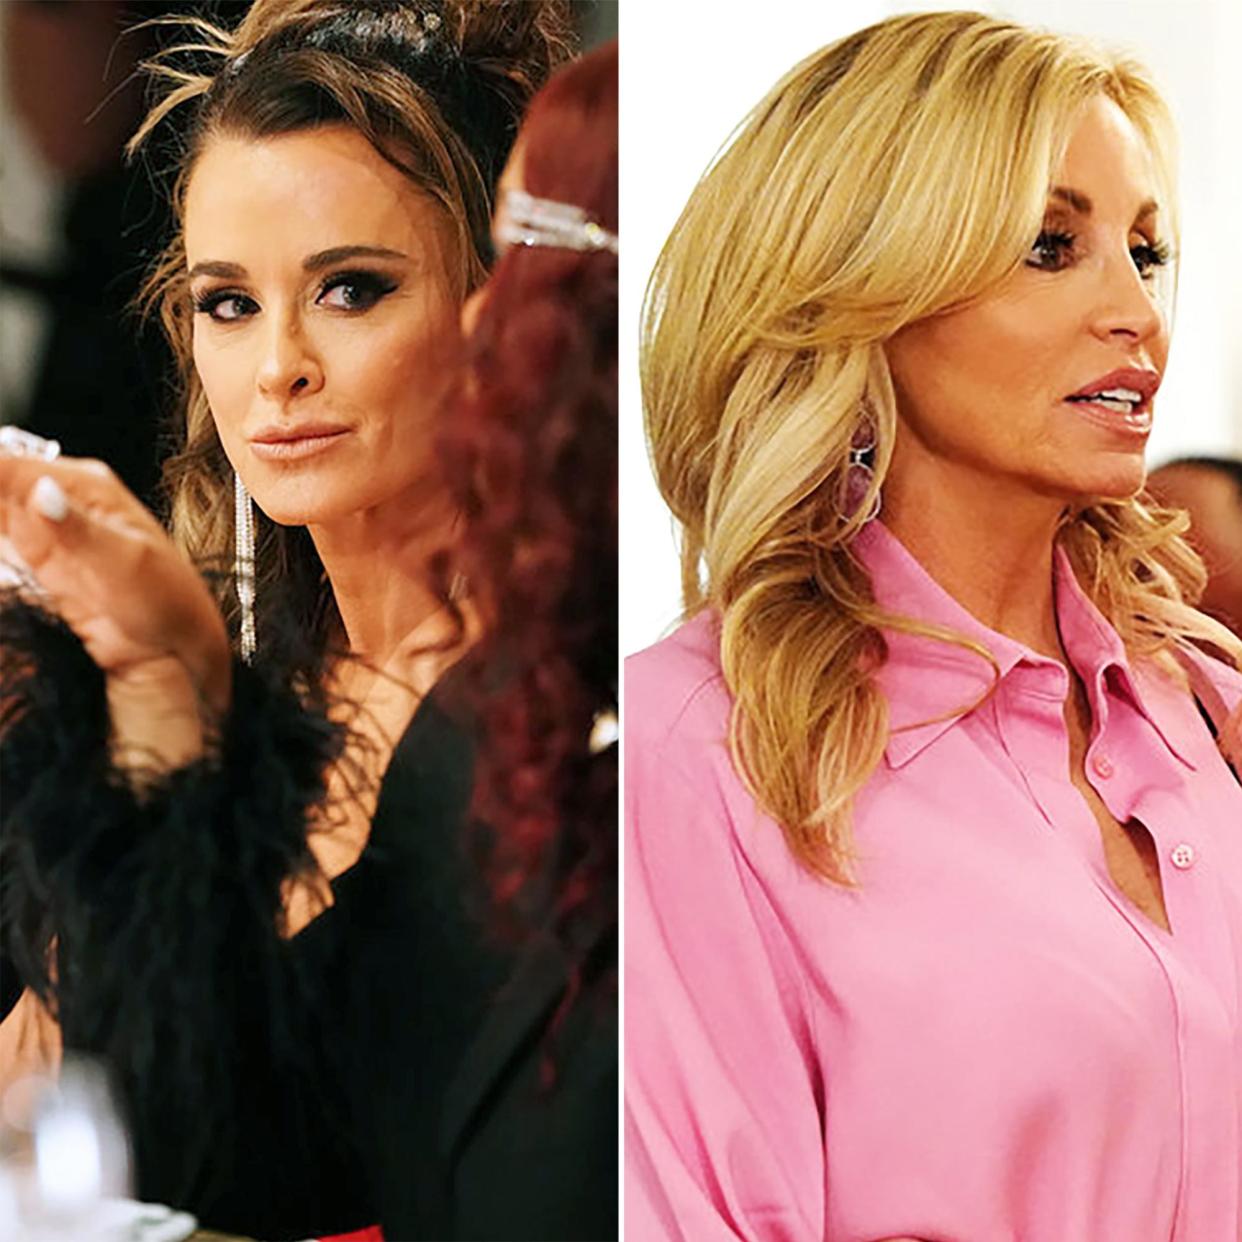 Kyle Richards Hosts RHOBHs 2nd Dinner Party From Hell Complete With Camille Grammer and Faye Resnick